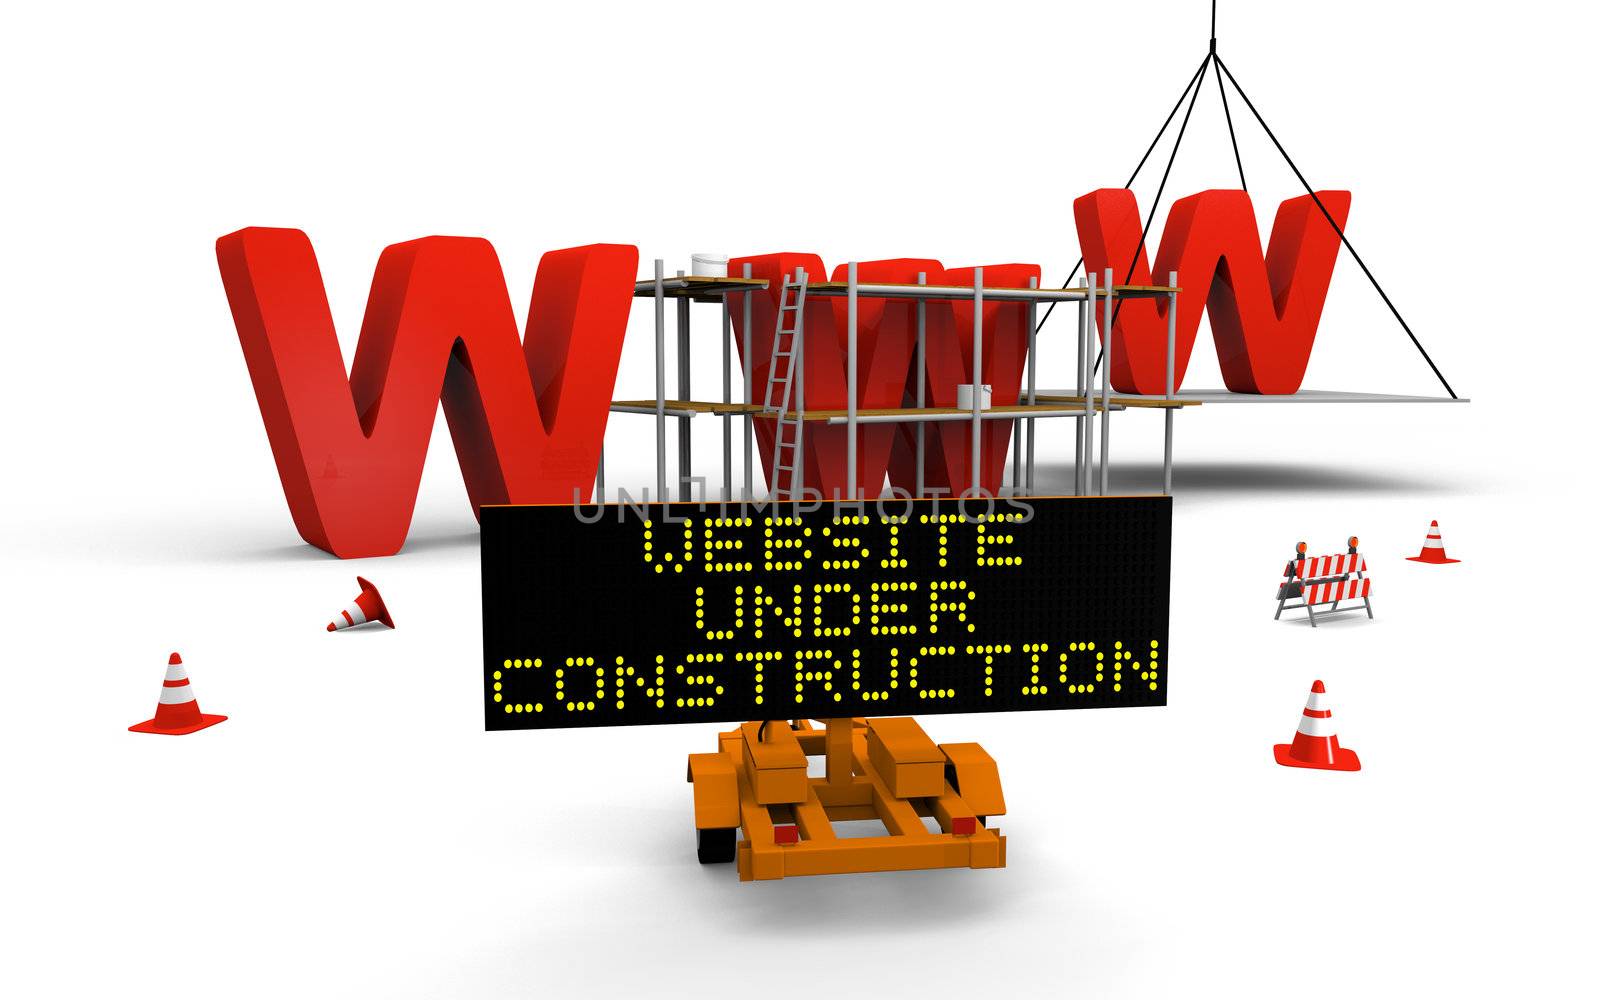 Website under construction by Harvepino